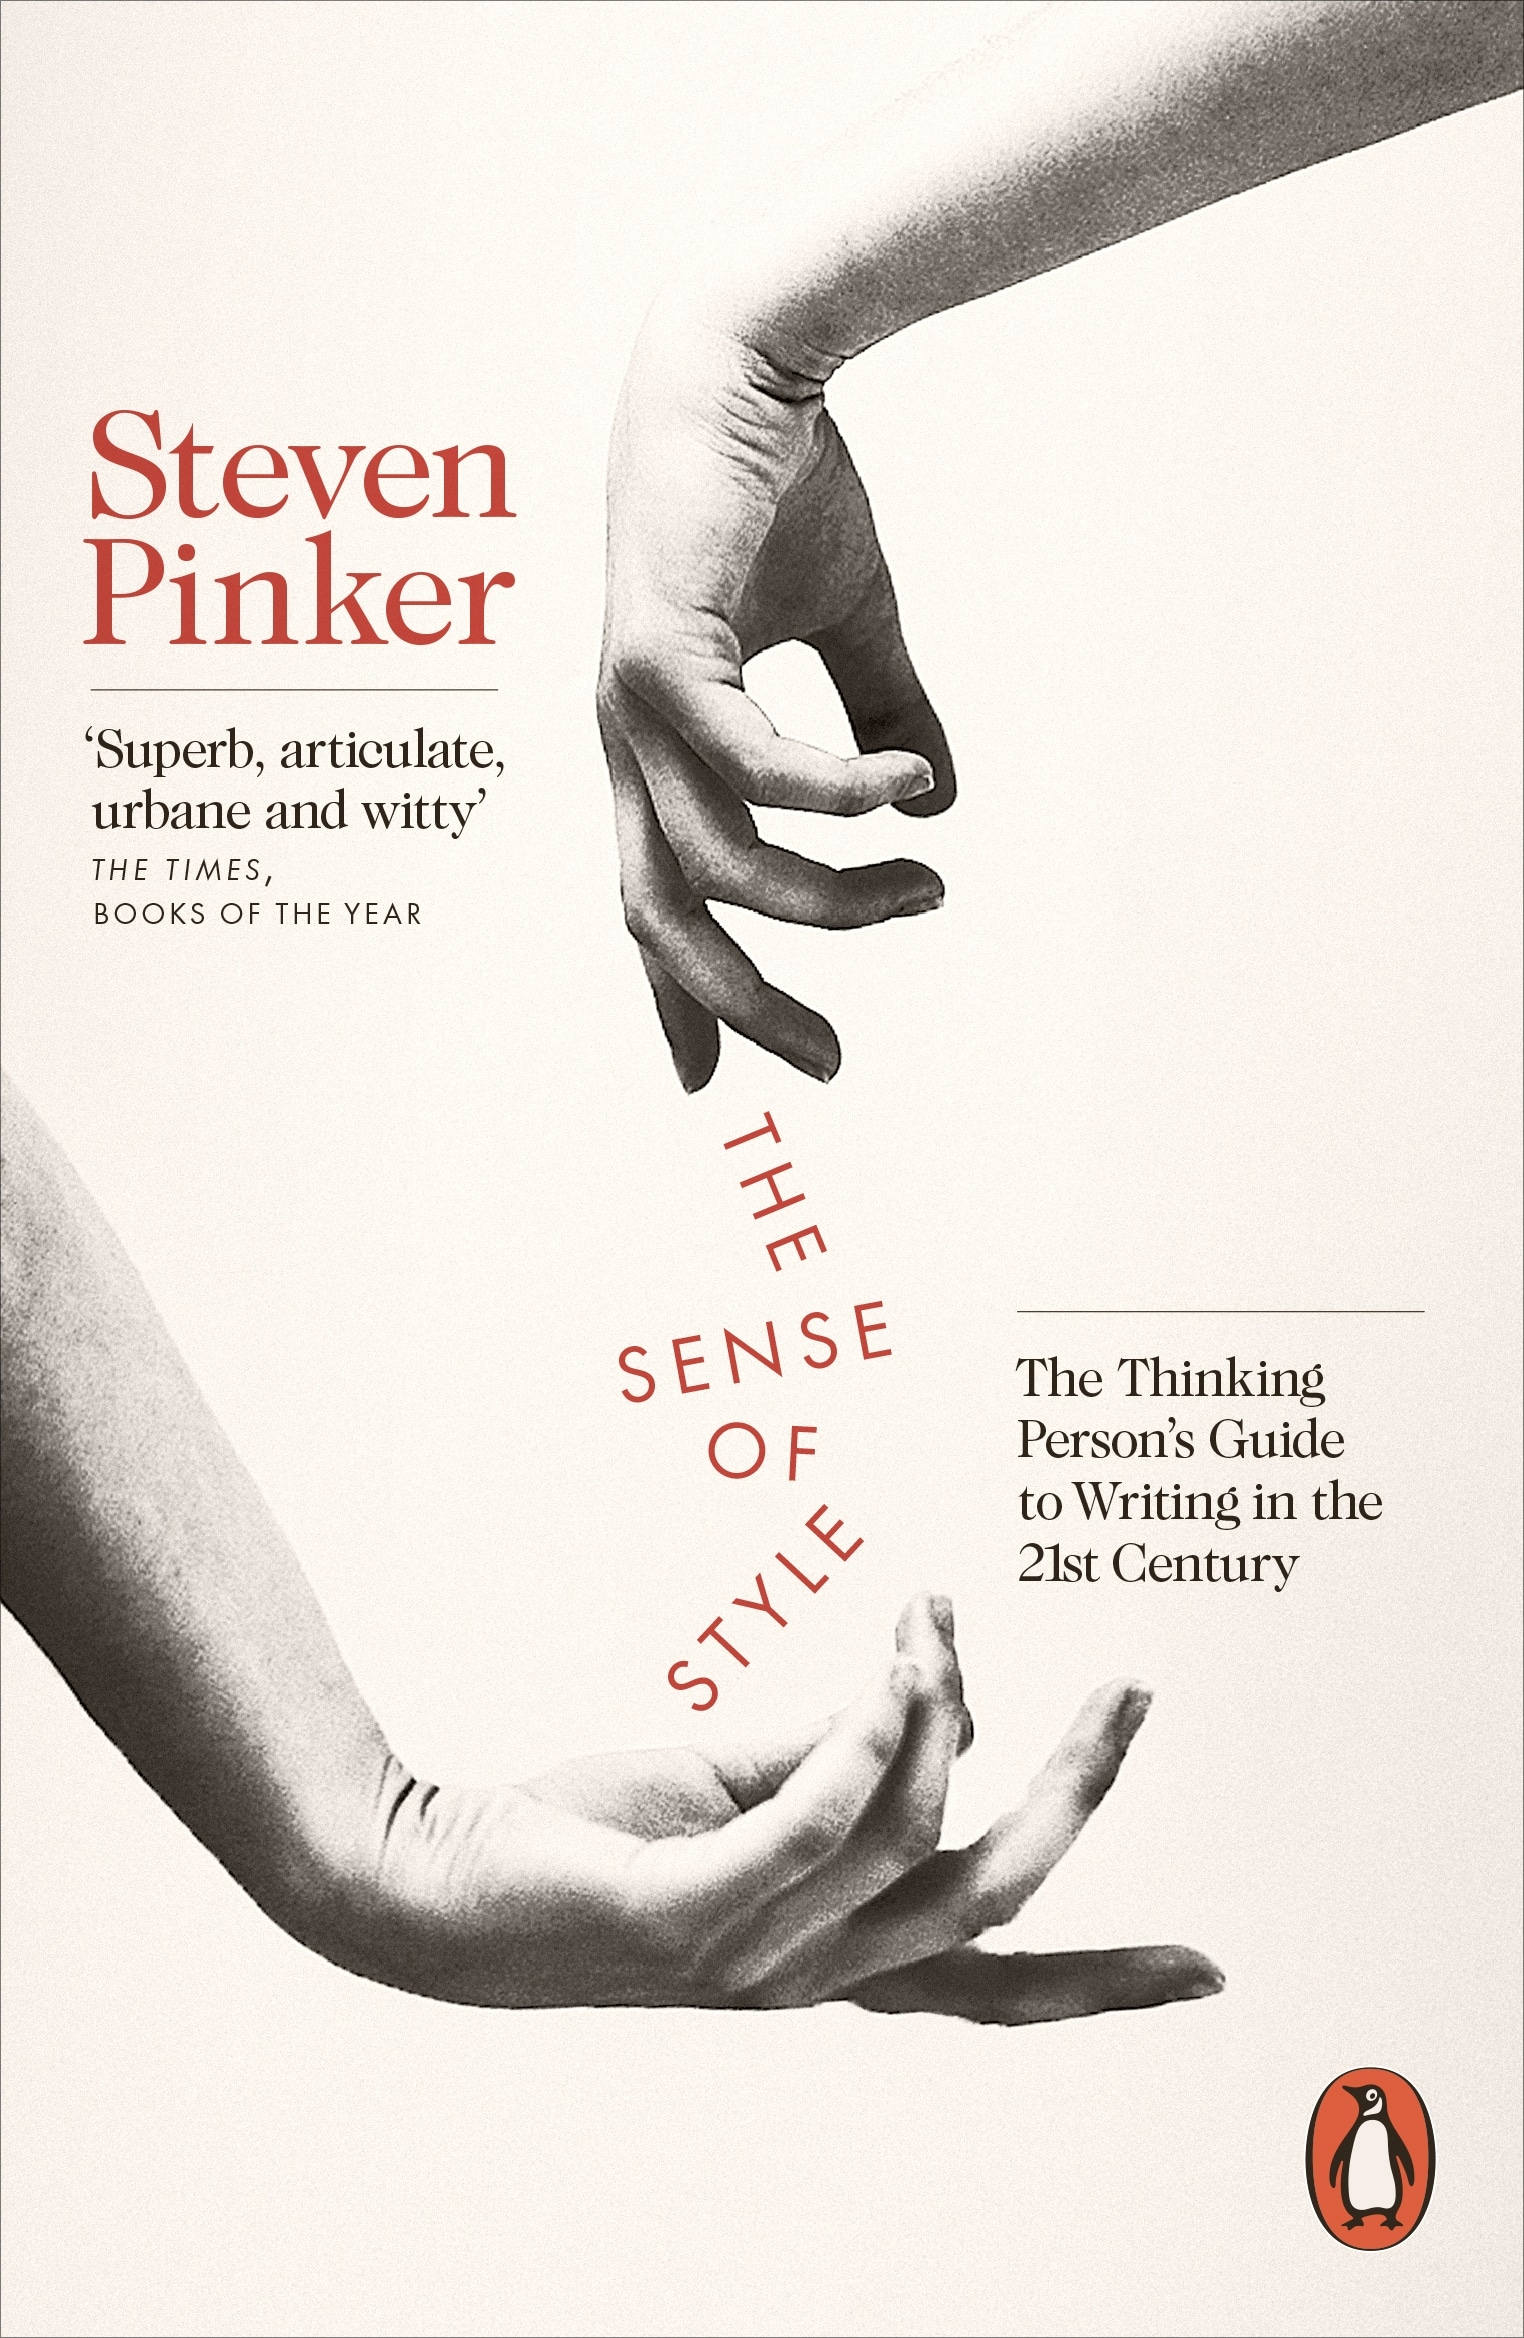 Book “The Sense of Style” by Steven Pinker